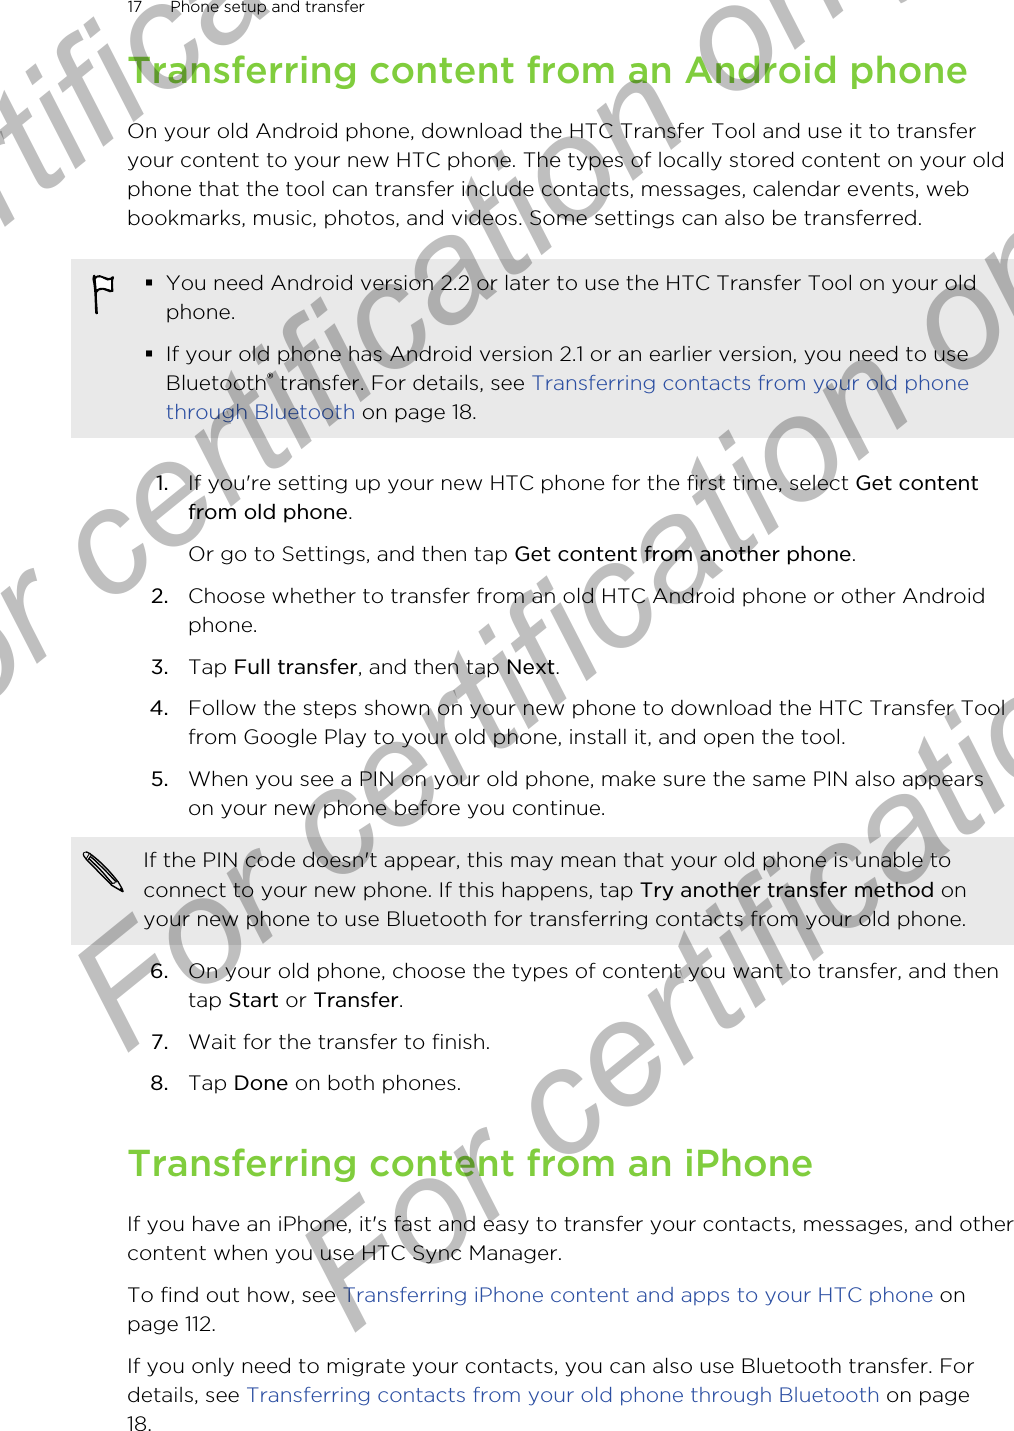 Transferring content from an Android phoneOn your old Android phone, download the HTC Transfer Tool and use it to transferyour content to your new HTC phone. The types of locally stored content on your oldphone that the tool can transfer include contacts, messages, calendar events, webbookmarks, music, photos, and videos. Some settings can also be transferred.§You need Android version 2.2 or later to use the HTC Transfer Tool on your oldphone.§If your old phone has Android version 2.1 or an earlier version, you need to useBluetooth® transfer. For details, see Transferring contacts from your old phonethrough Bluetooth on page 18.1. If you&apos;re setting up your new HTC phone for the first time, select Get contentfrom old phone. Or go to Settings, and then tap Get content from another phone.2. Choose whether to transfer from an old HTC Android phone or other Androidphone.3. Tap Full transfer, and then tap Next.4. Follow the steps shown on your new phone to download the HTC Transfer Toolfrom Google Play to your old phone, install it, and open the tool.5. When you see a PIN on your old phone, make sure the same PIN also appearson your new phone before you continue. If the PIN code doesn&apos;t appear, this may mean that your old phone is unable toconnect to your new phone. If this happens, tap Try another transfer method onyour new phone to use Bluetooth for transferring contacts from your old phone.6. On your old phone, choose the types of content you want to transfer, and thentap Start or Transfer.7. Wait for the transfer to finish.8. Tap Done on both phones.Transferring content from an iPhoneIf you have an iPhone, it&apos;s fast and easy to transfer your contacts, messages, and othercontent when you use HTC Sync Manager.To find out how, see Transferring iPhone content and apps to your HTC phone onpage 112.If you only need to migrate your contacts, you can also use Bluetooth transfer. Fordetails, see Transferring contacts from your old phone through Bluetooth on page18.17 Phone setup and transferFor certification  For certification only  For certification only  For certification only 